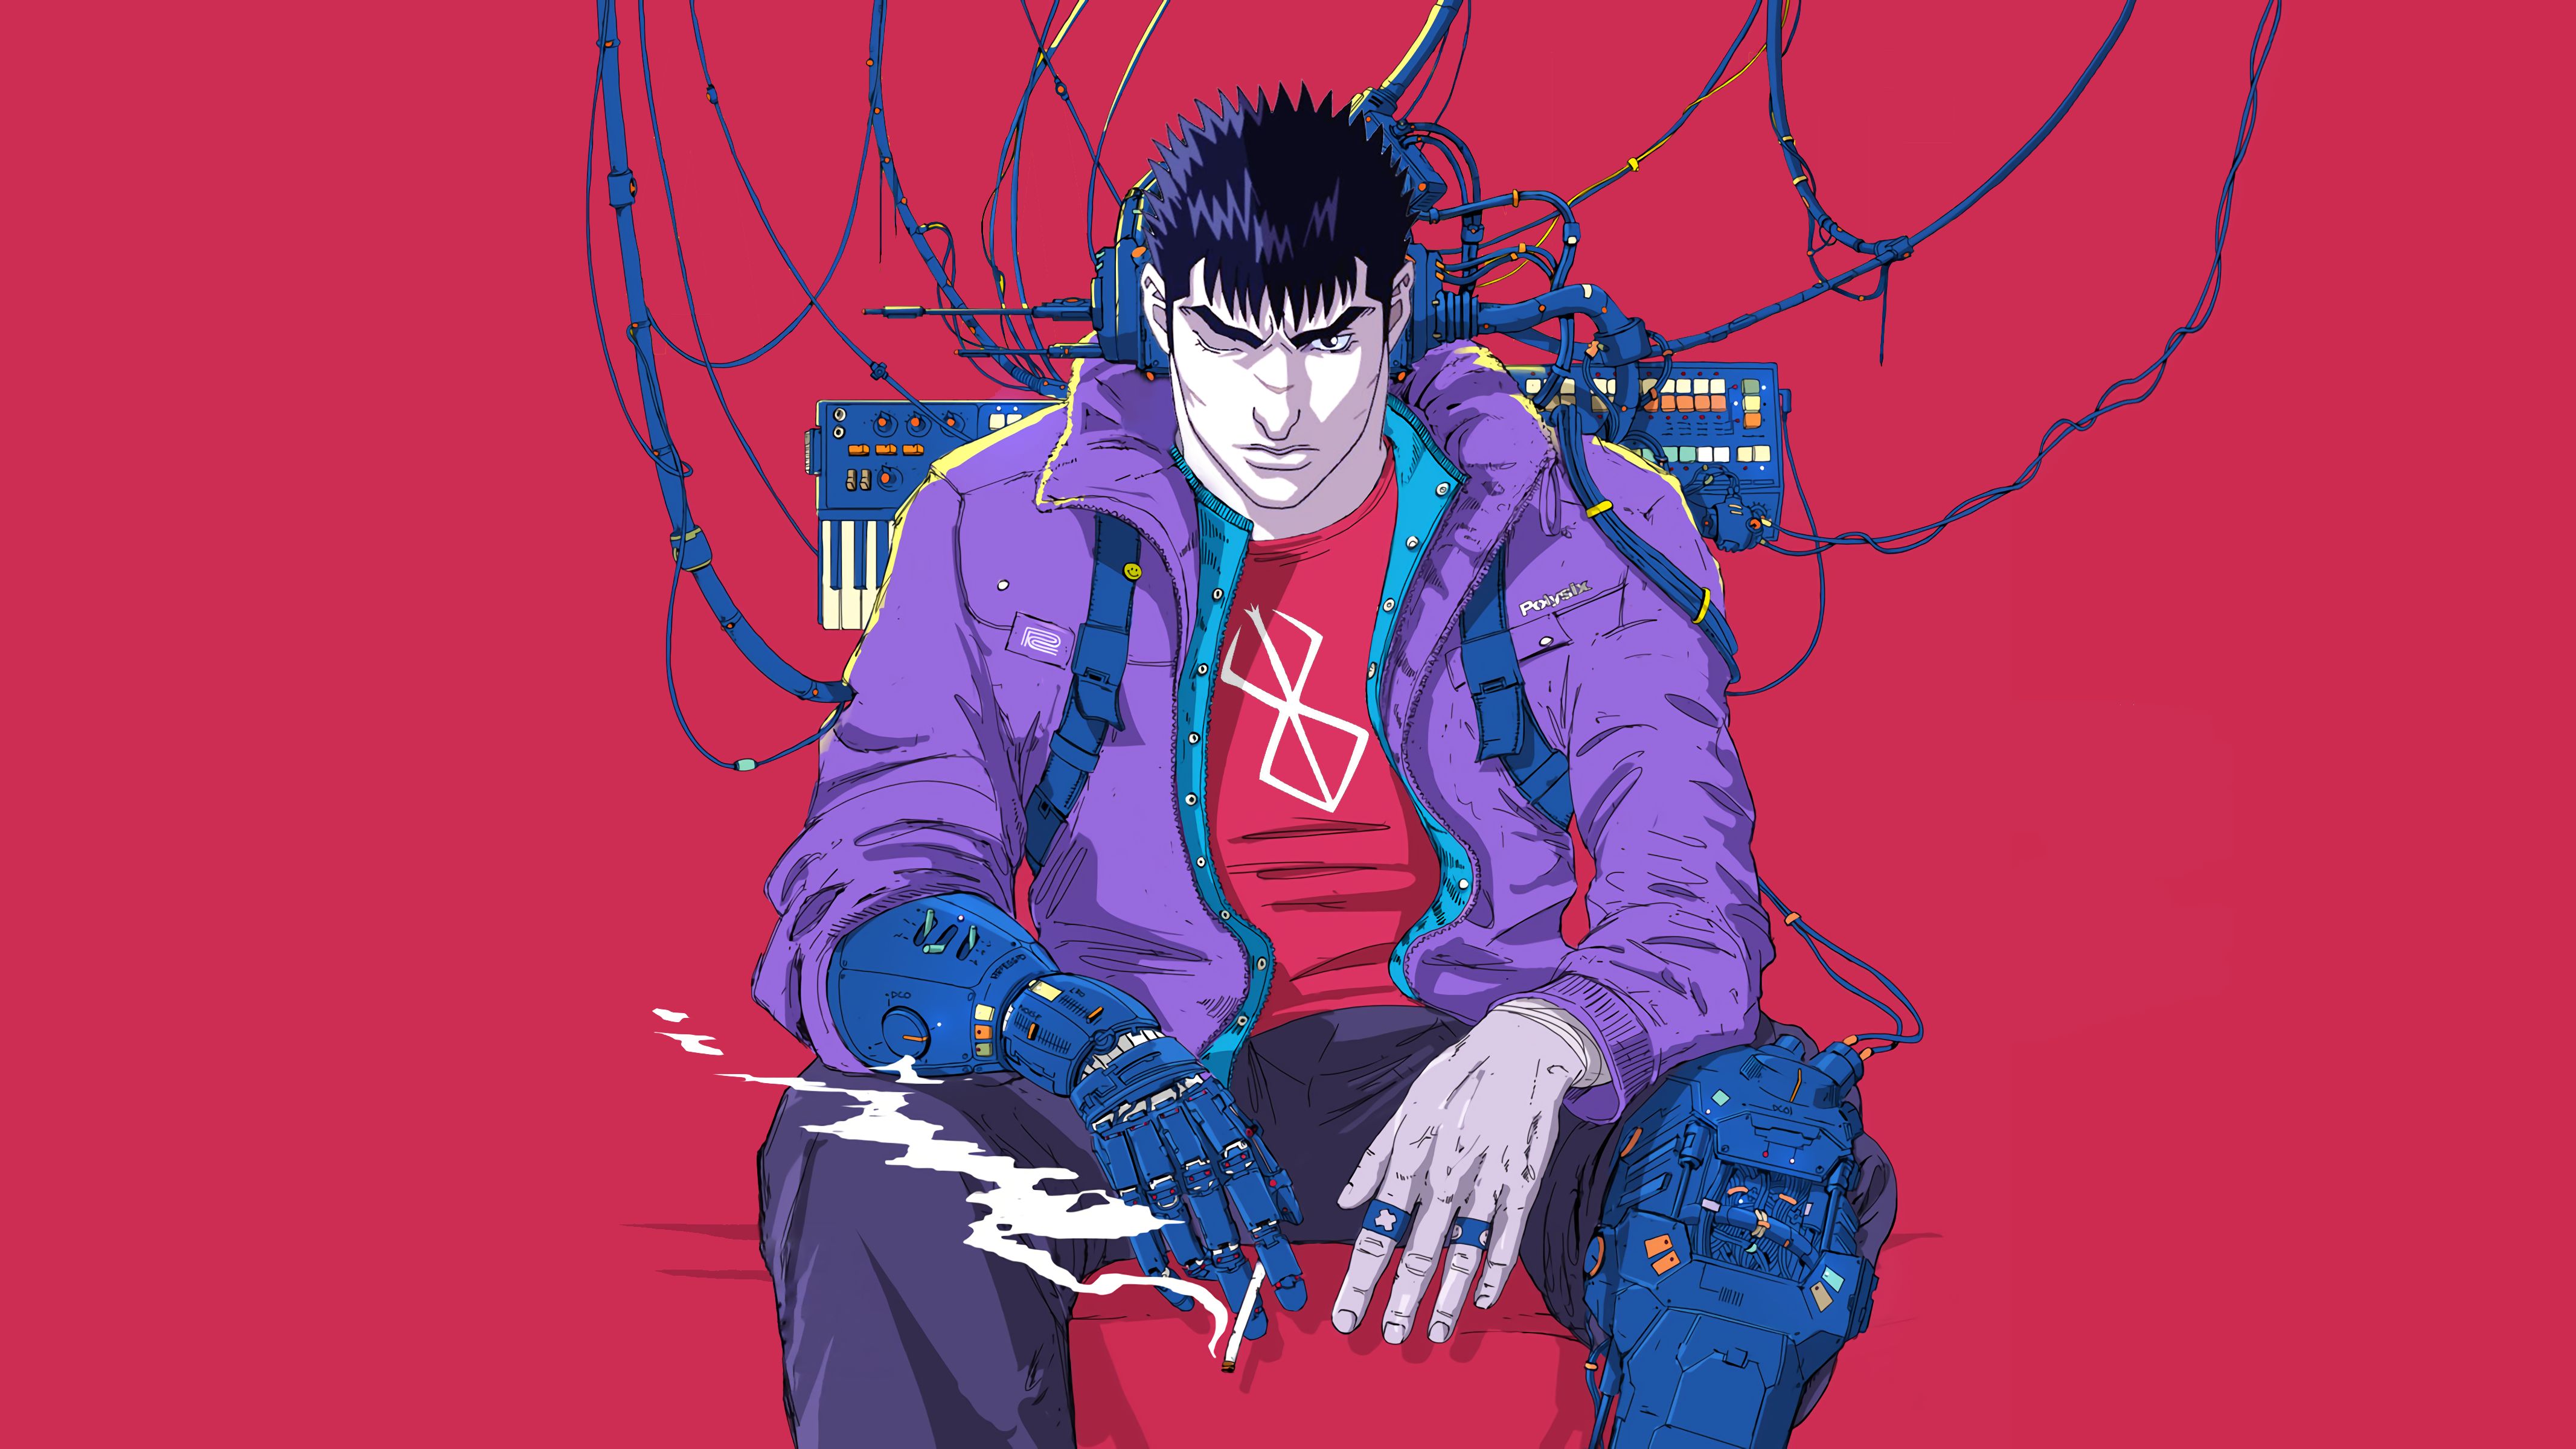 Mobile wallpaper Cyberpunk Sci Fi Berserk 1000816 download the picture  for free